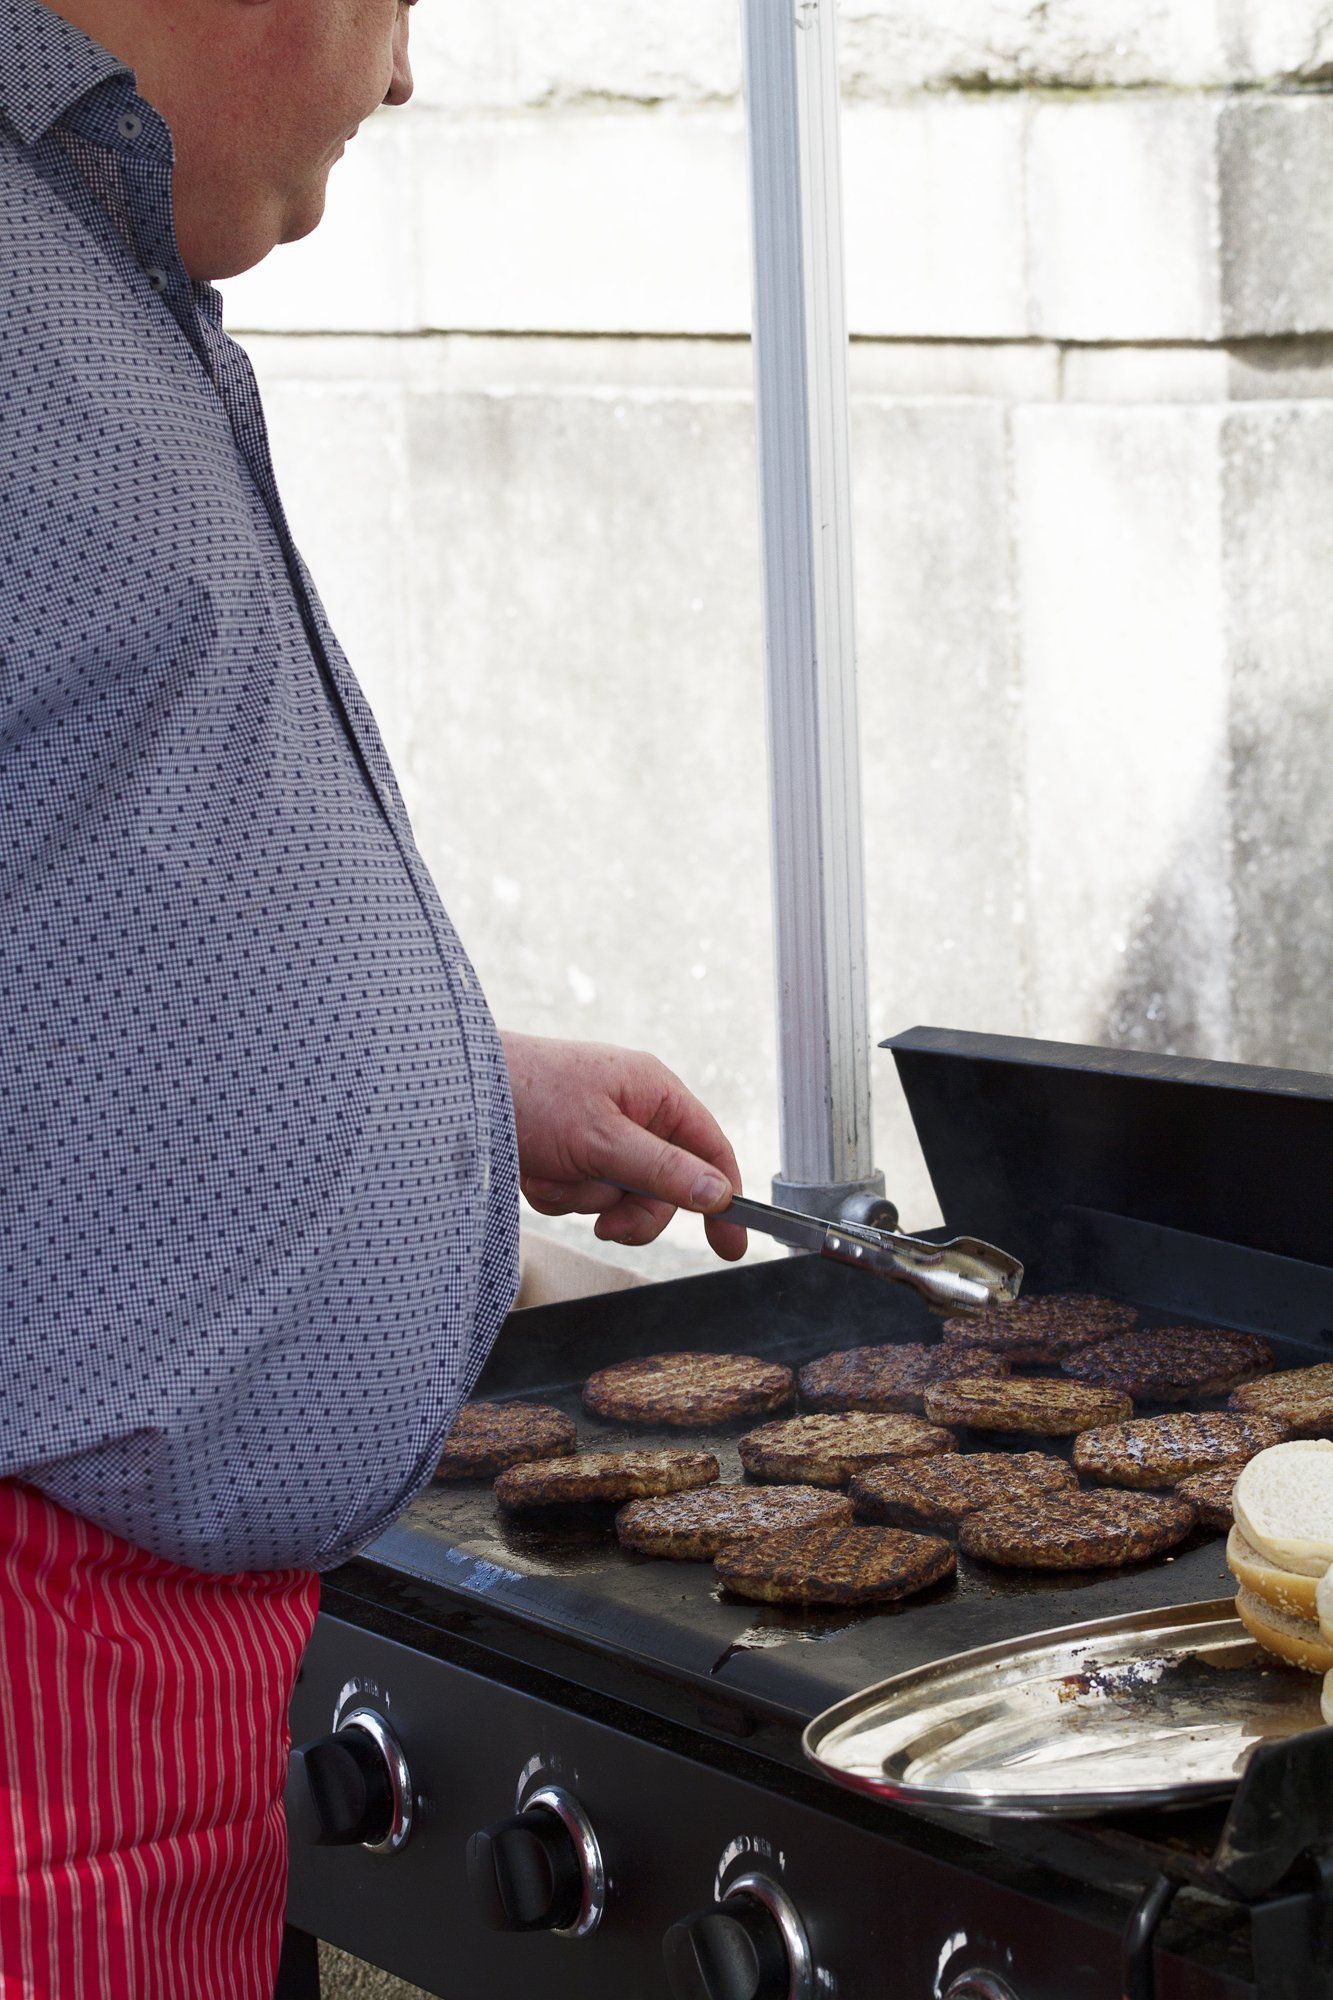 A man is cooking hamburgers on a grill with a spatula.